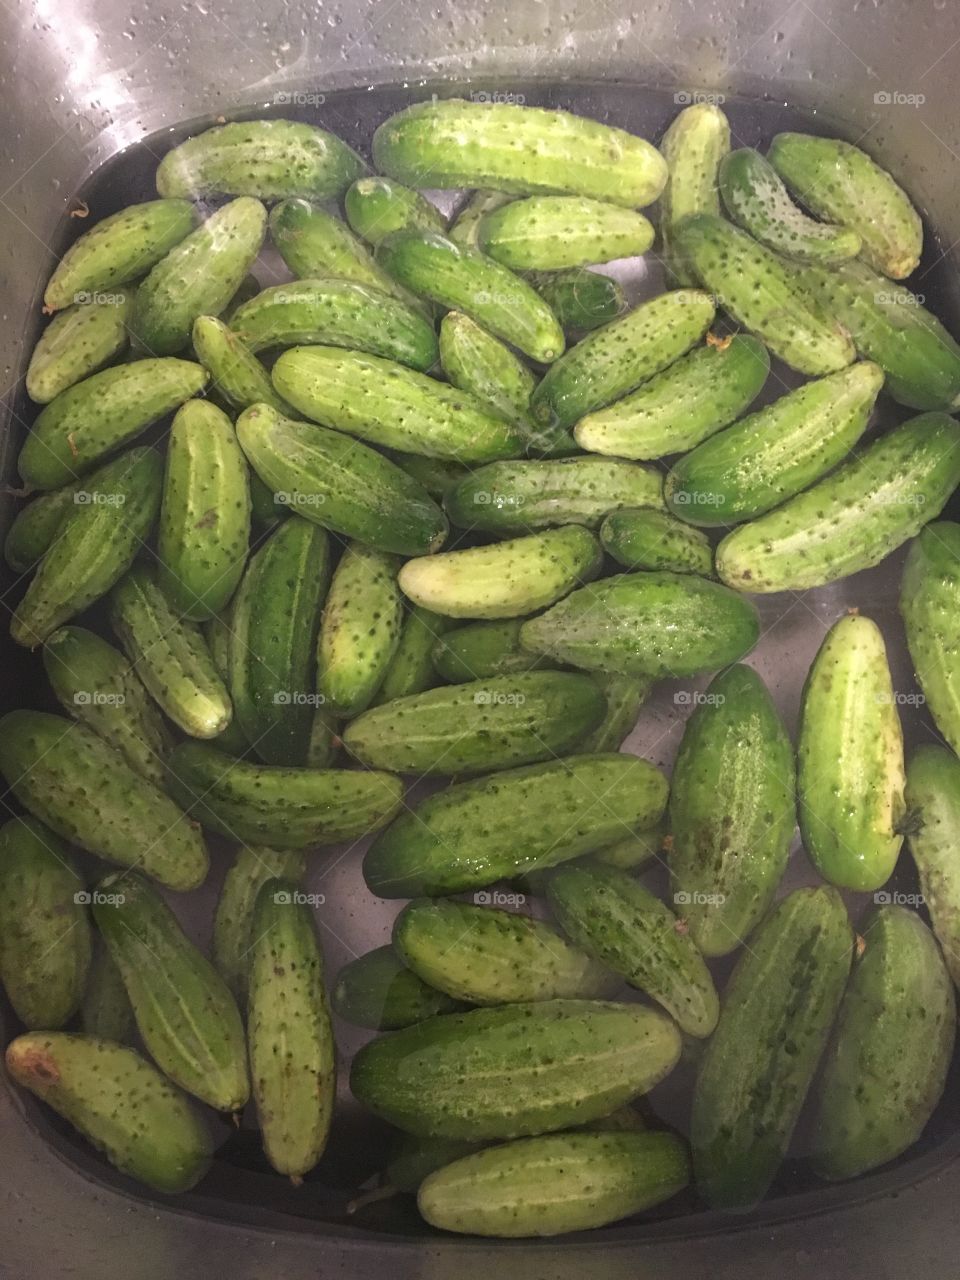 Cleaning cucumbers for pickle making